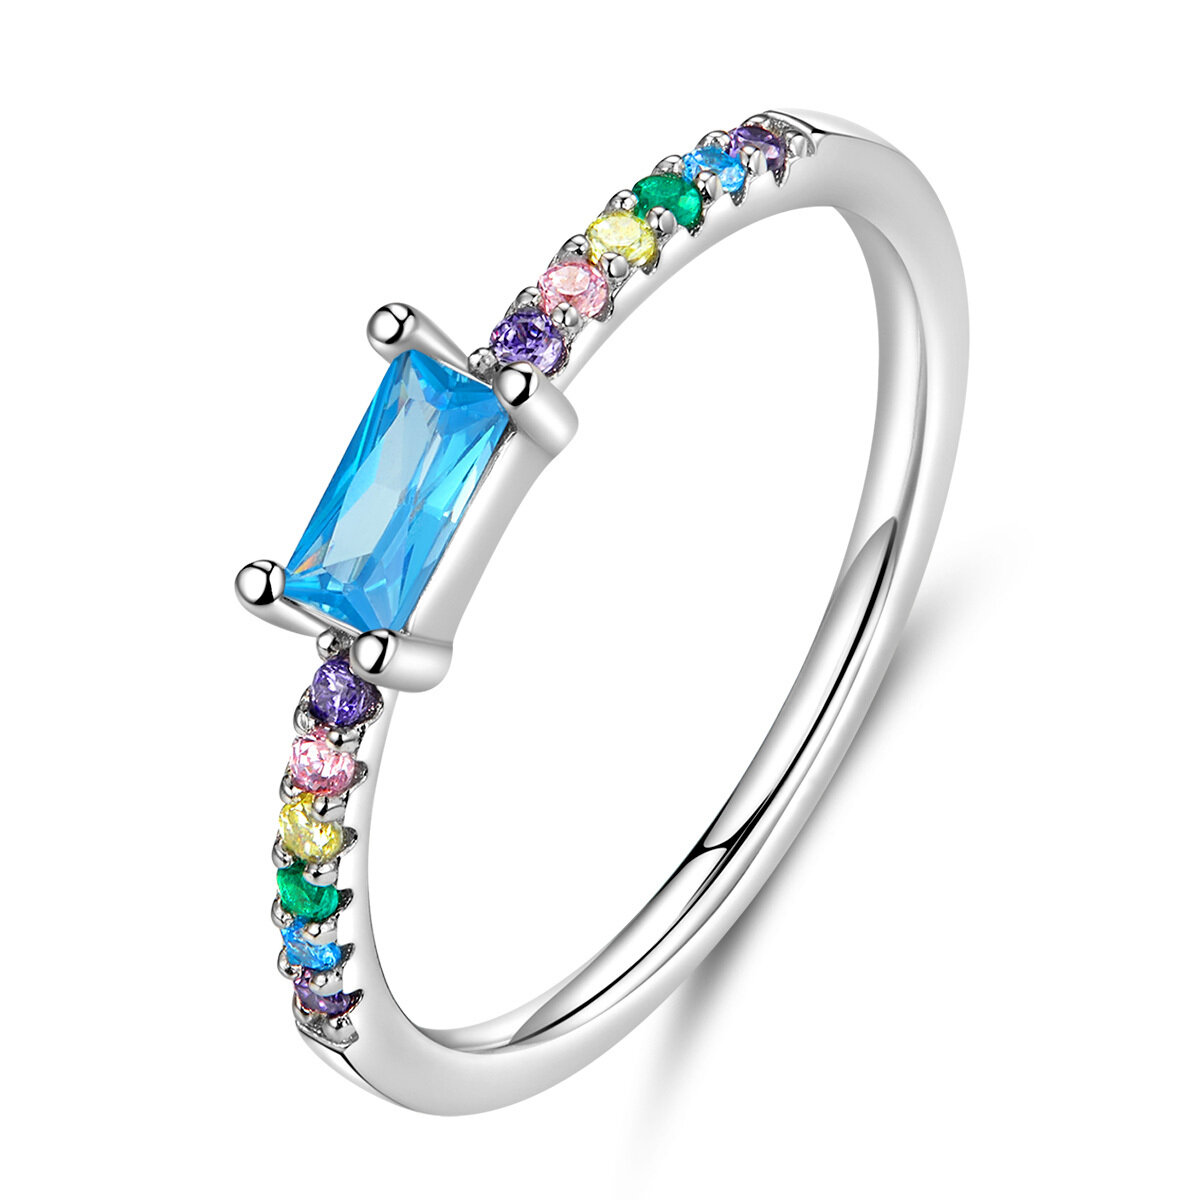 GemKing Meet the Rainbow S925 Sterling Silver ring